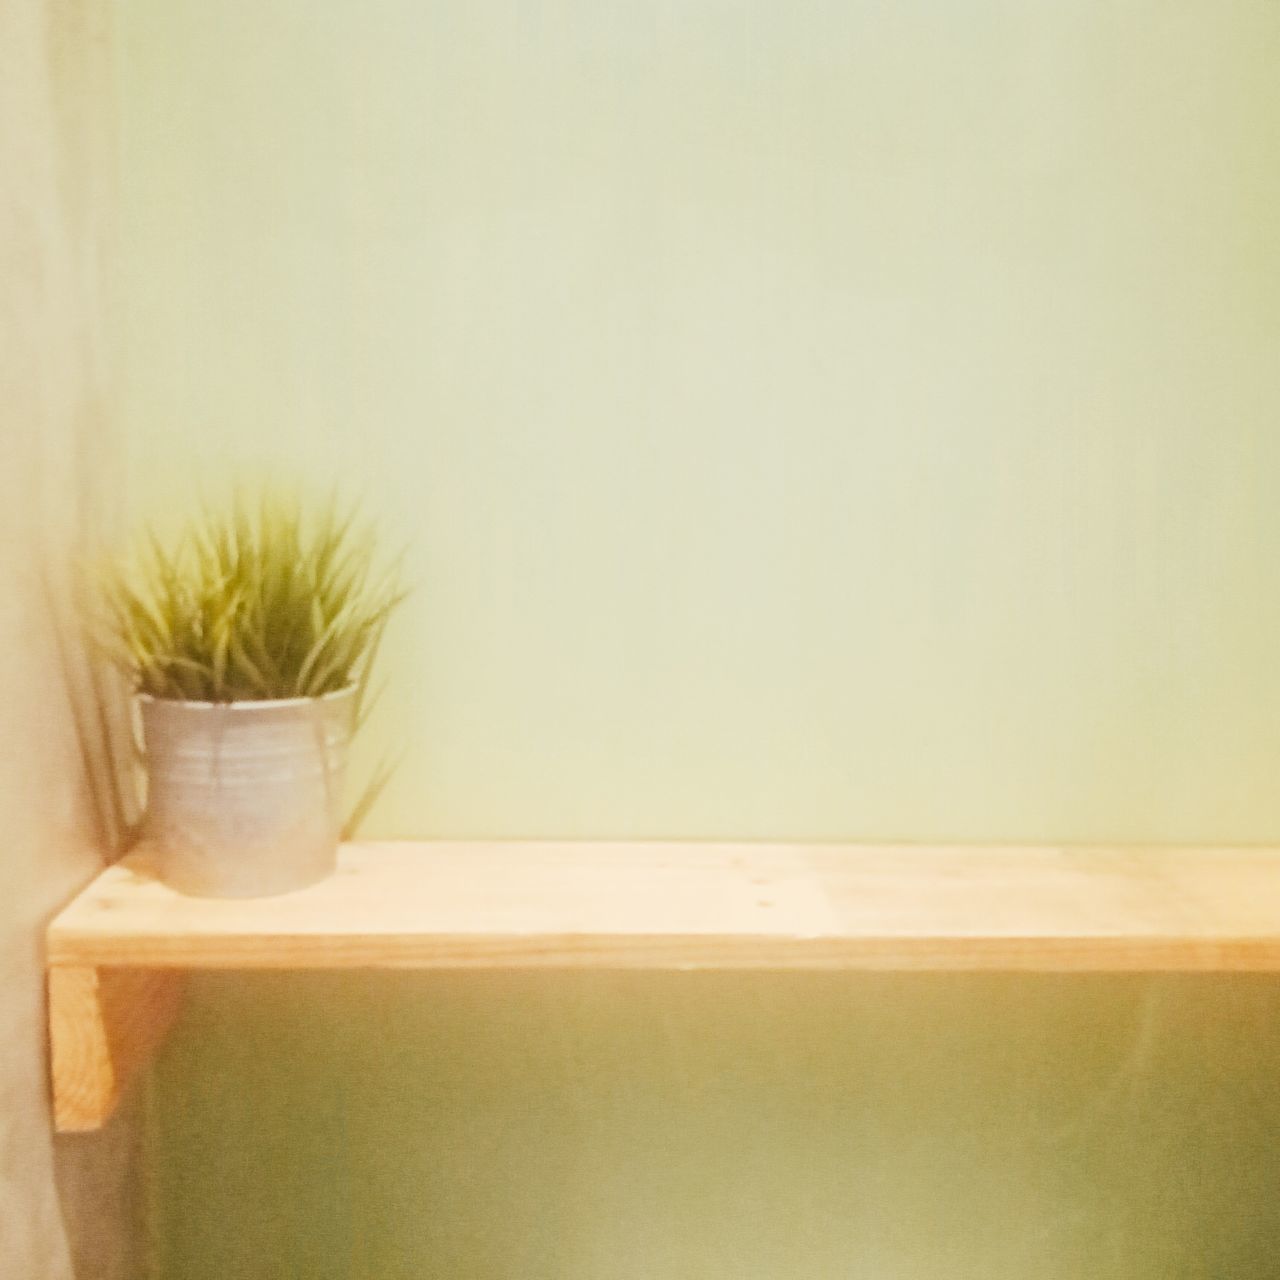 POTTED PLANTS ON WALL AT HOME